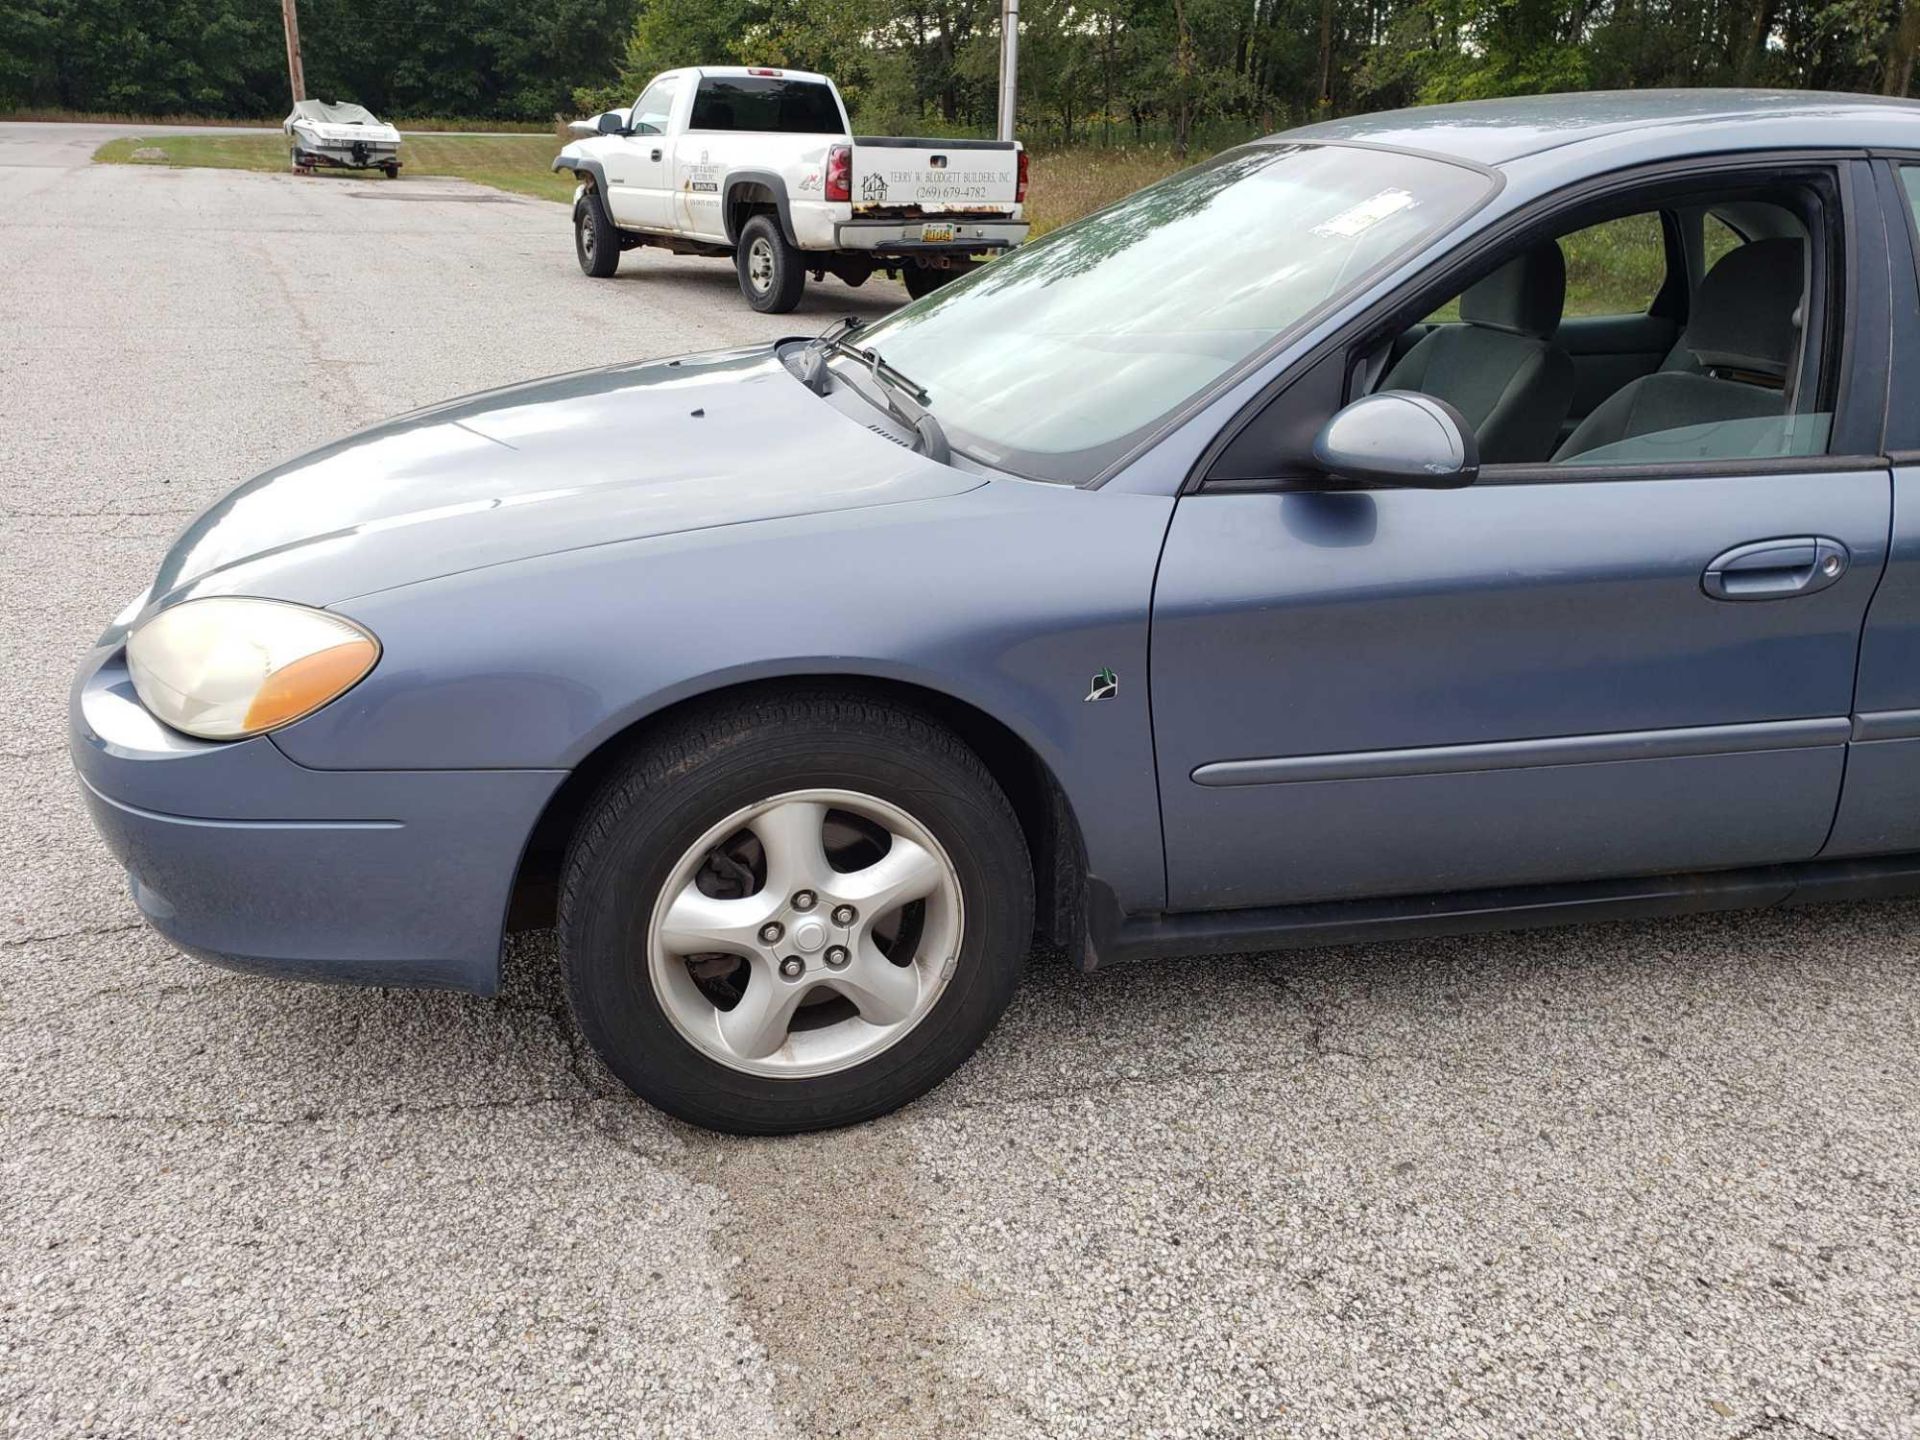 2001 Ford Taurus VIN 1FAFP53291G230229, 70,126 miles. Municipally owned and maintained. - Image 2 of 18